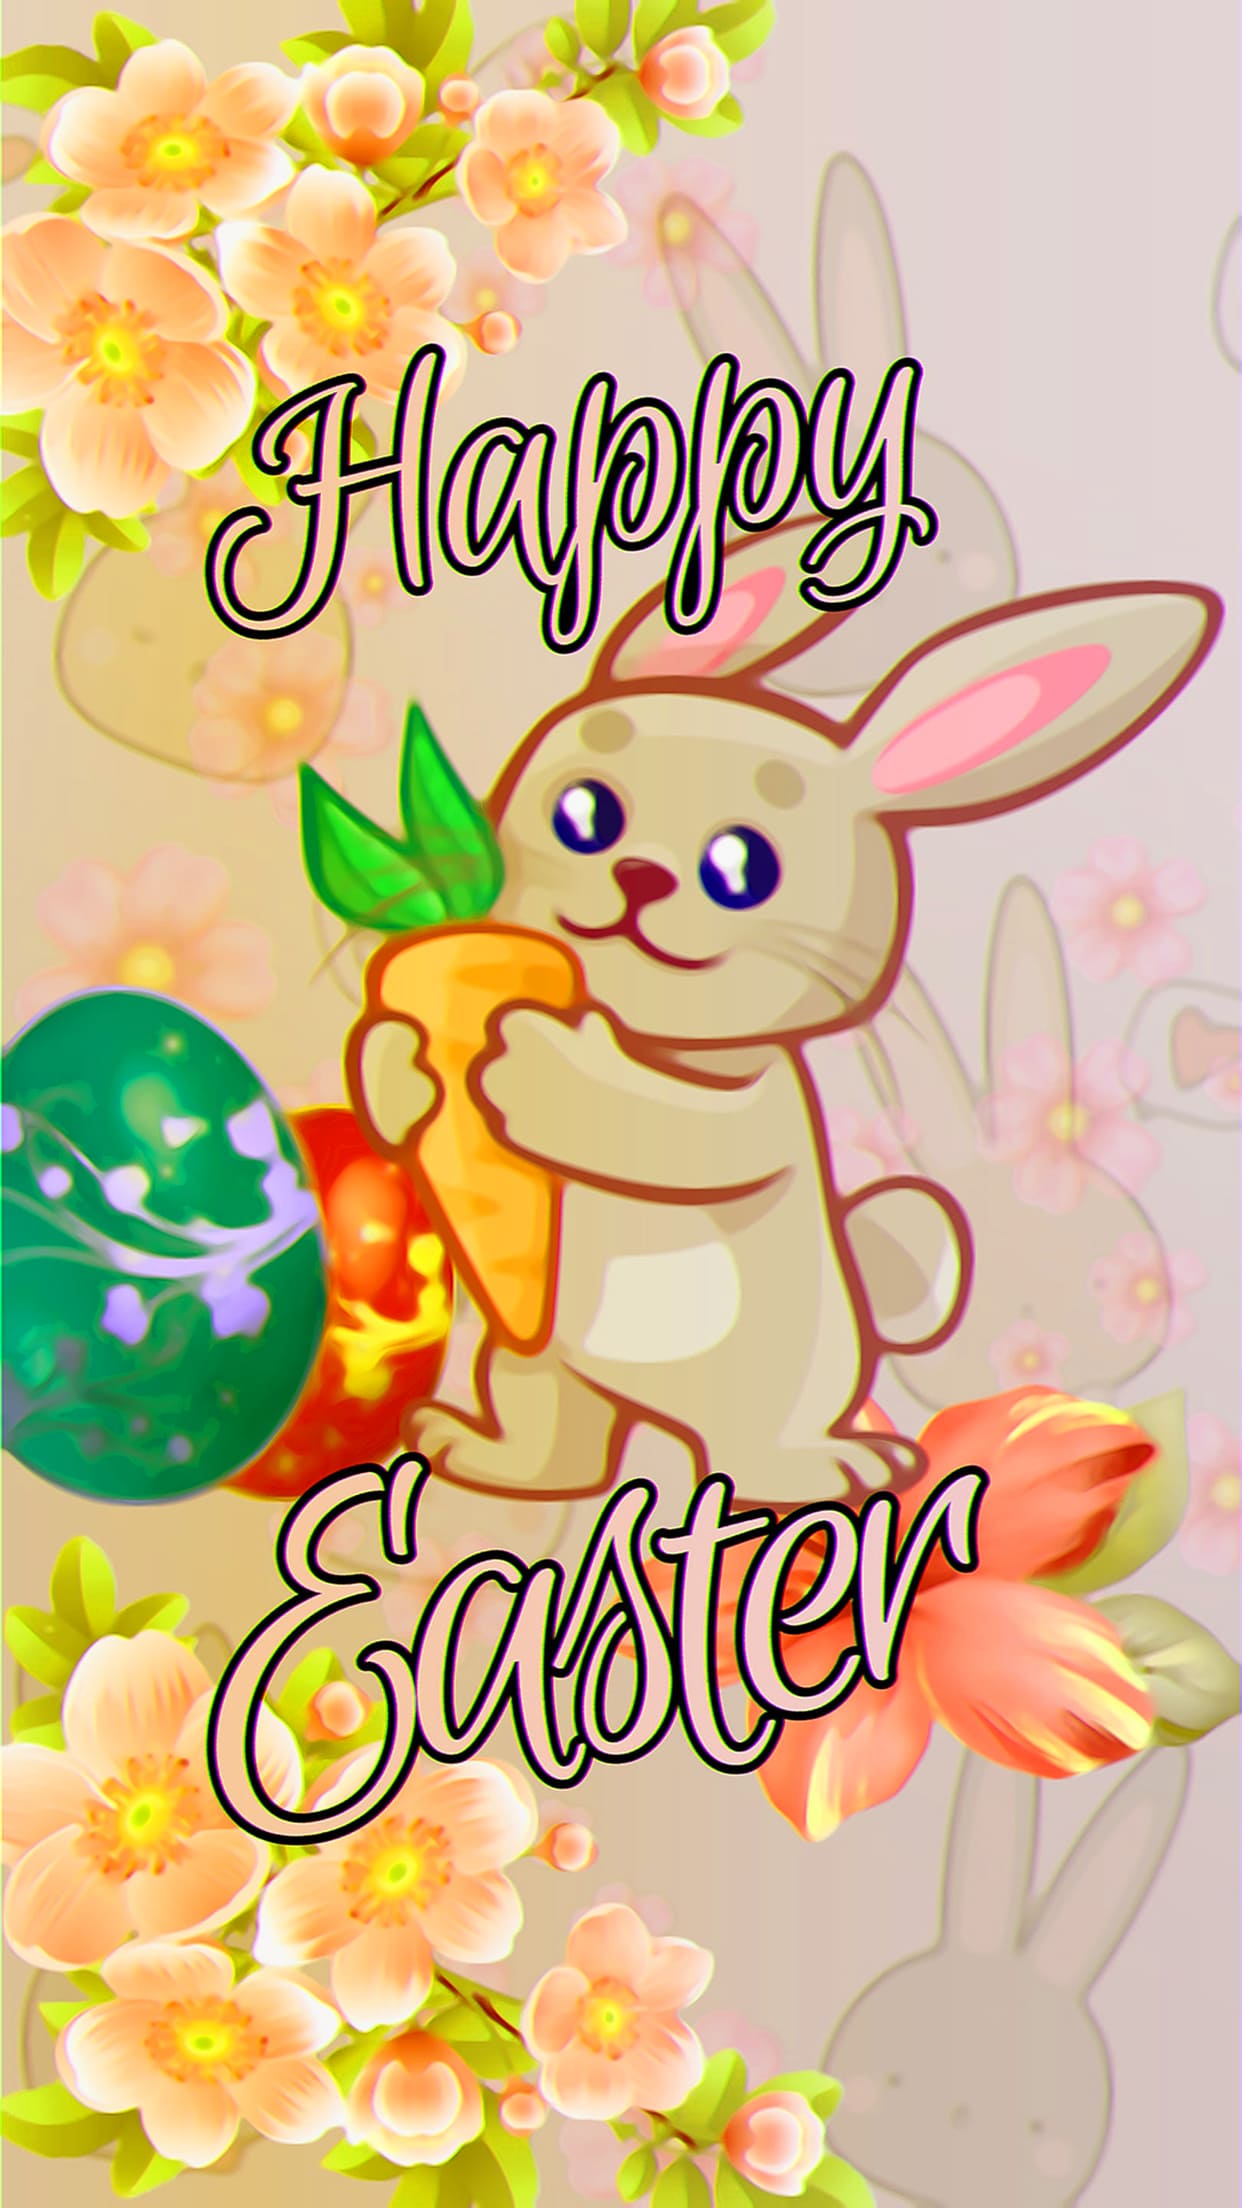 Easter Bunny Wallpapers